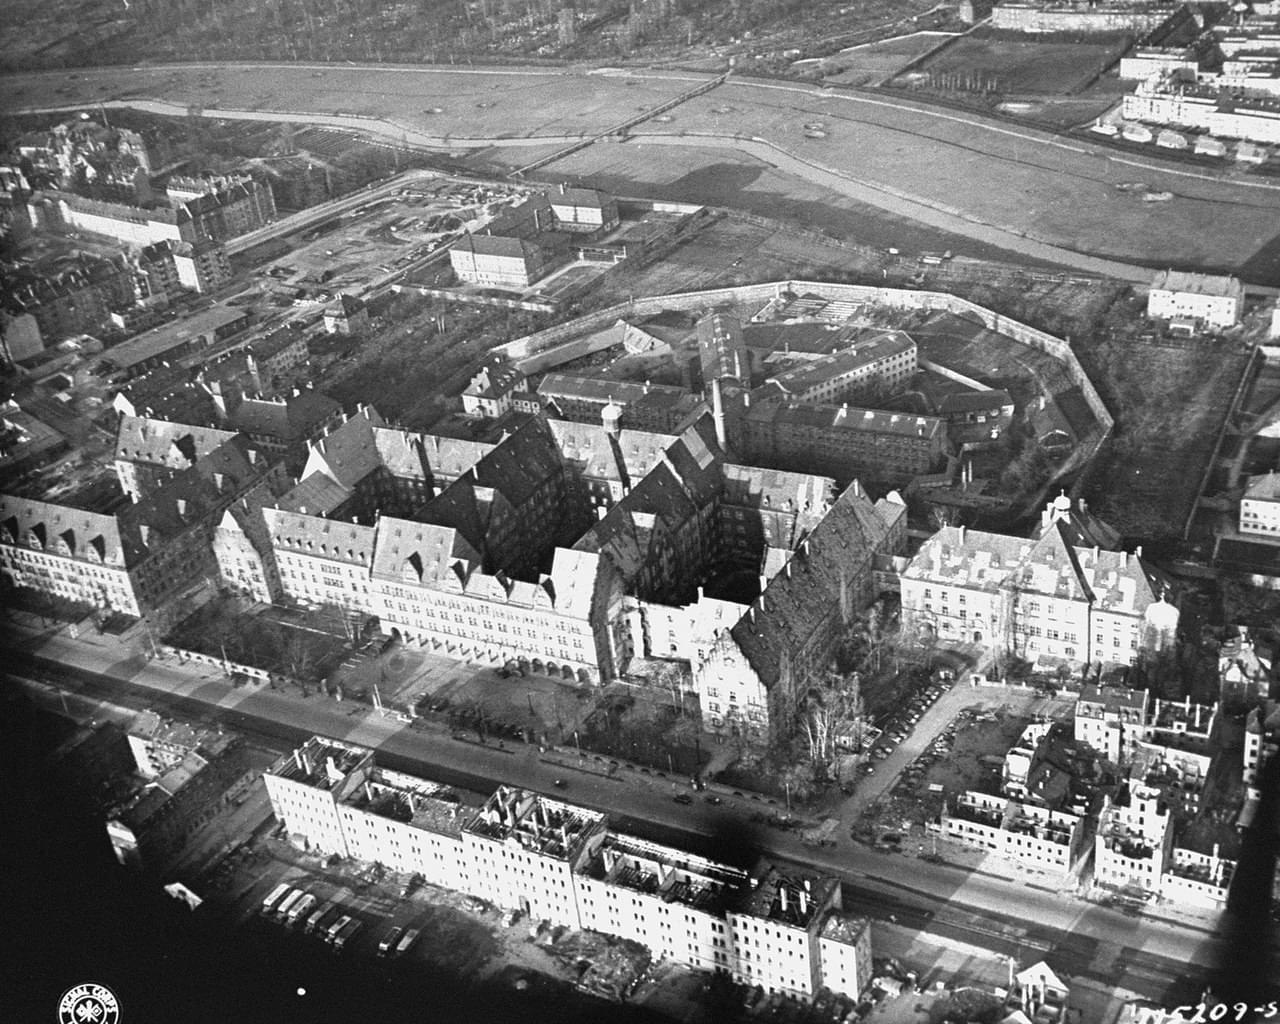 An aerial view of the Palace of Justice in 1945, with a prison building right behind it